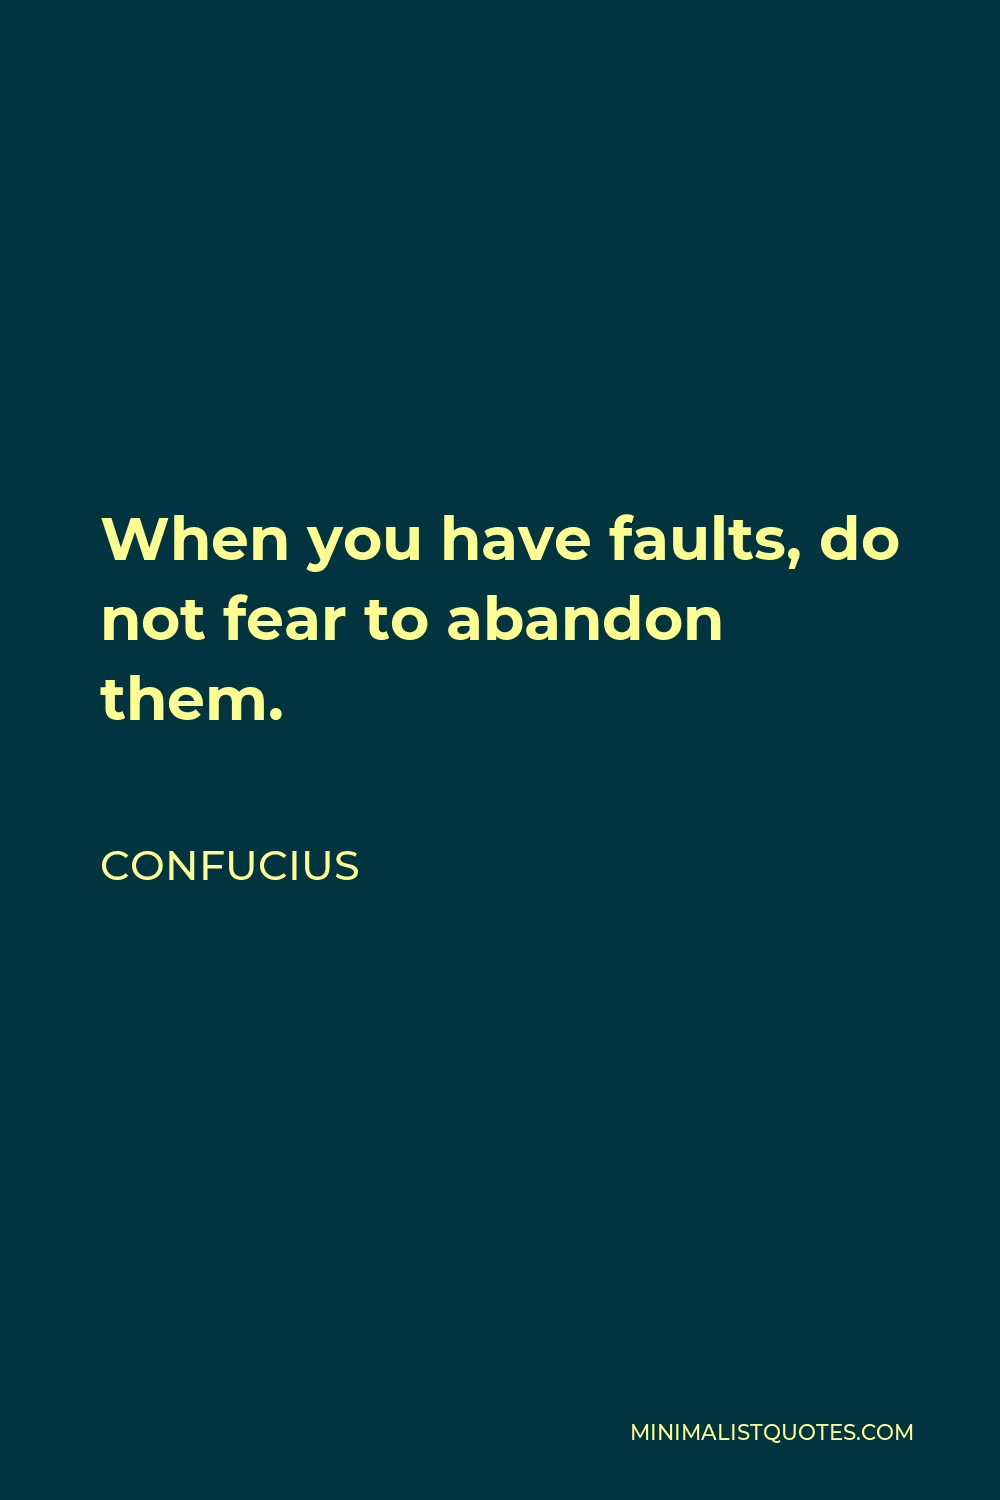 Confucius Quote - When you have faults, do not fear to abandon them.